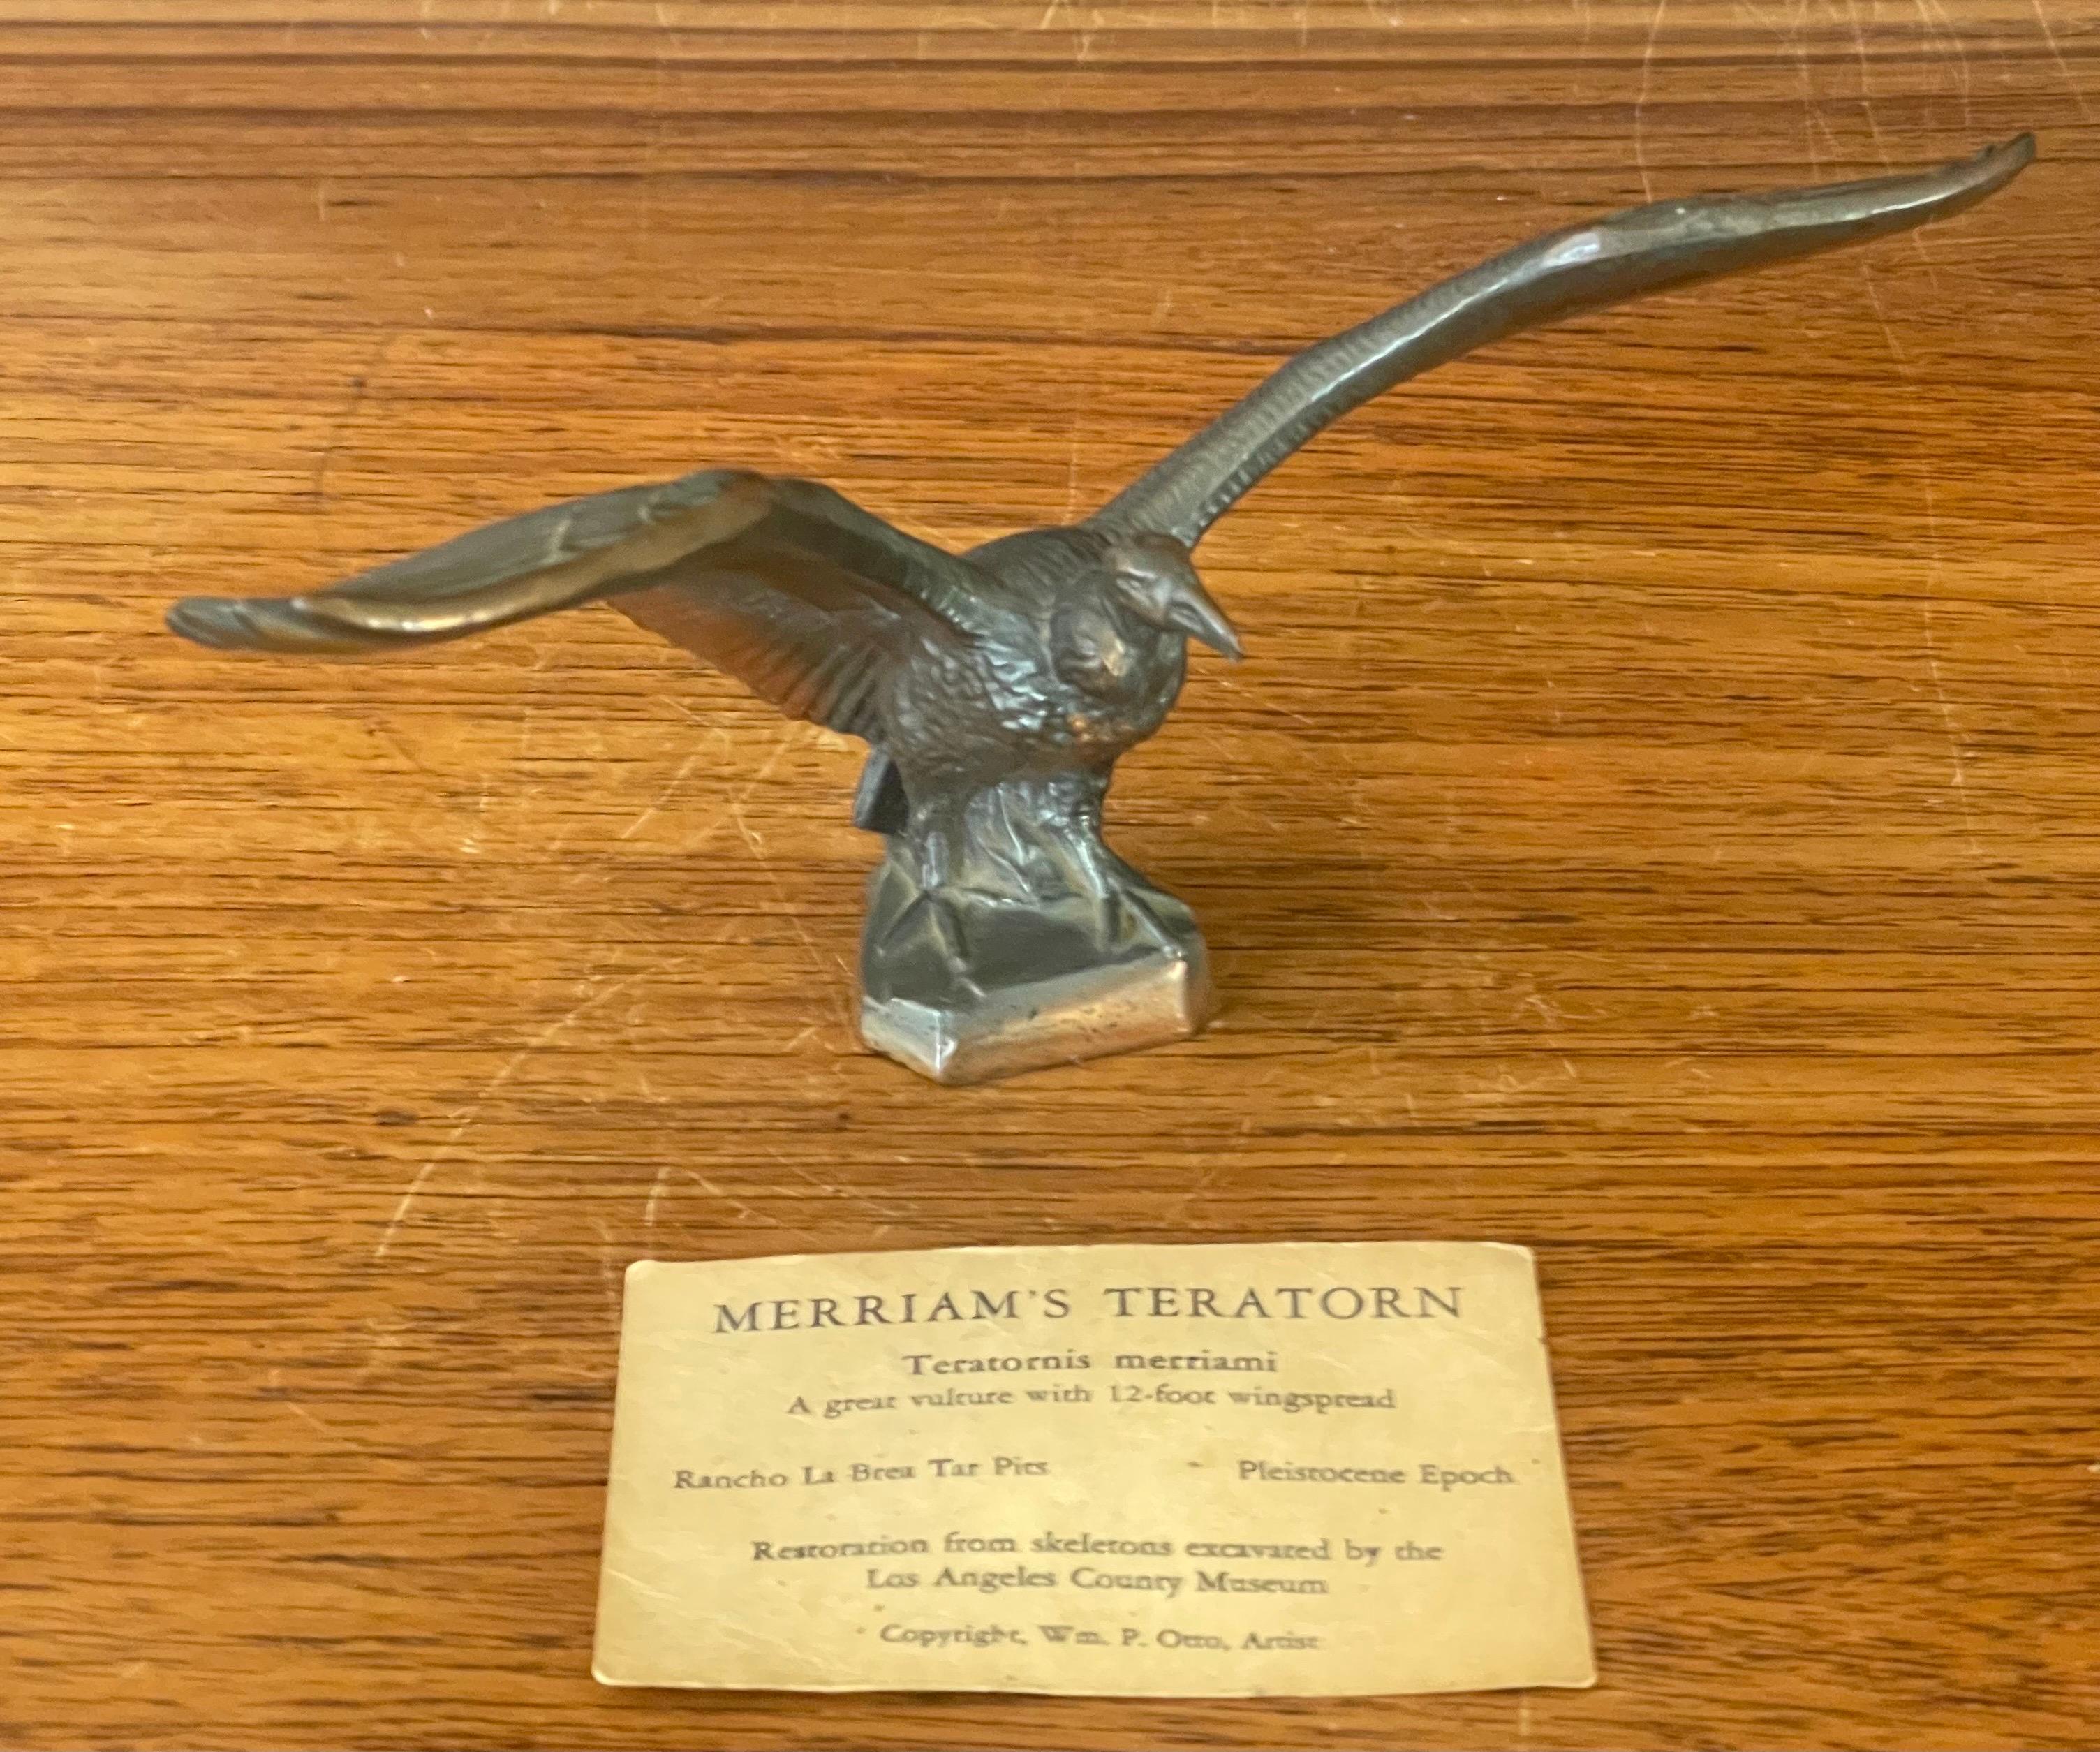 American Vintage Collection of 12 Bronze Sculptures by Wm Otto for La Brea Tar Pits